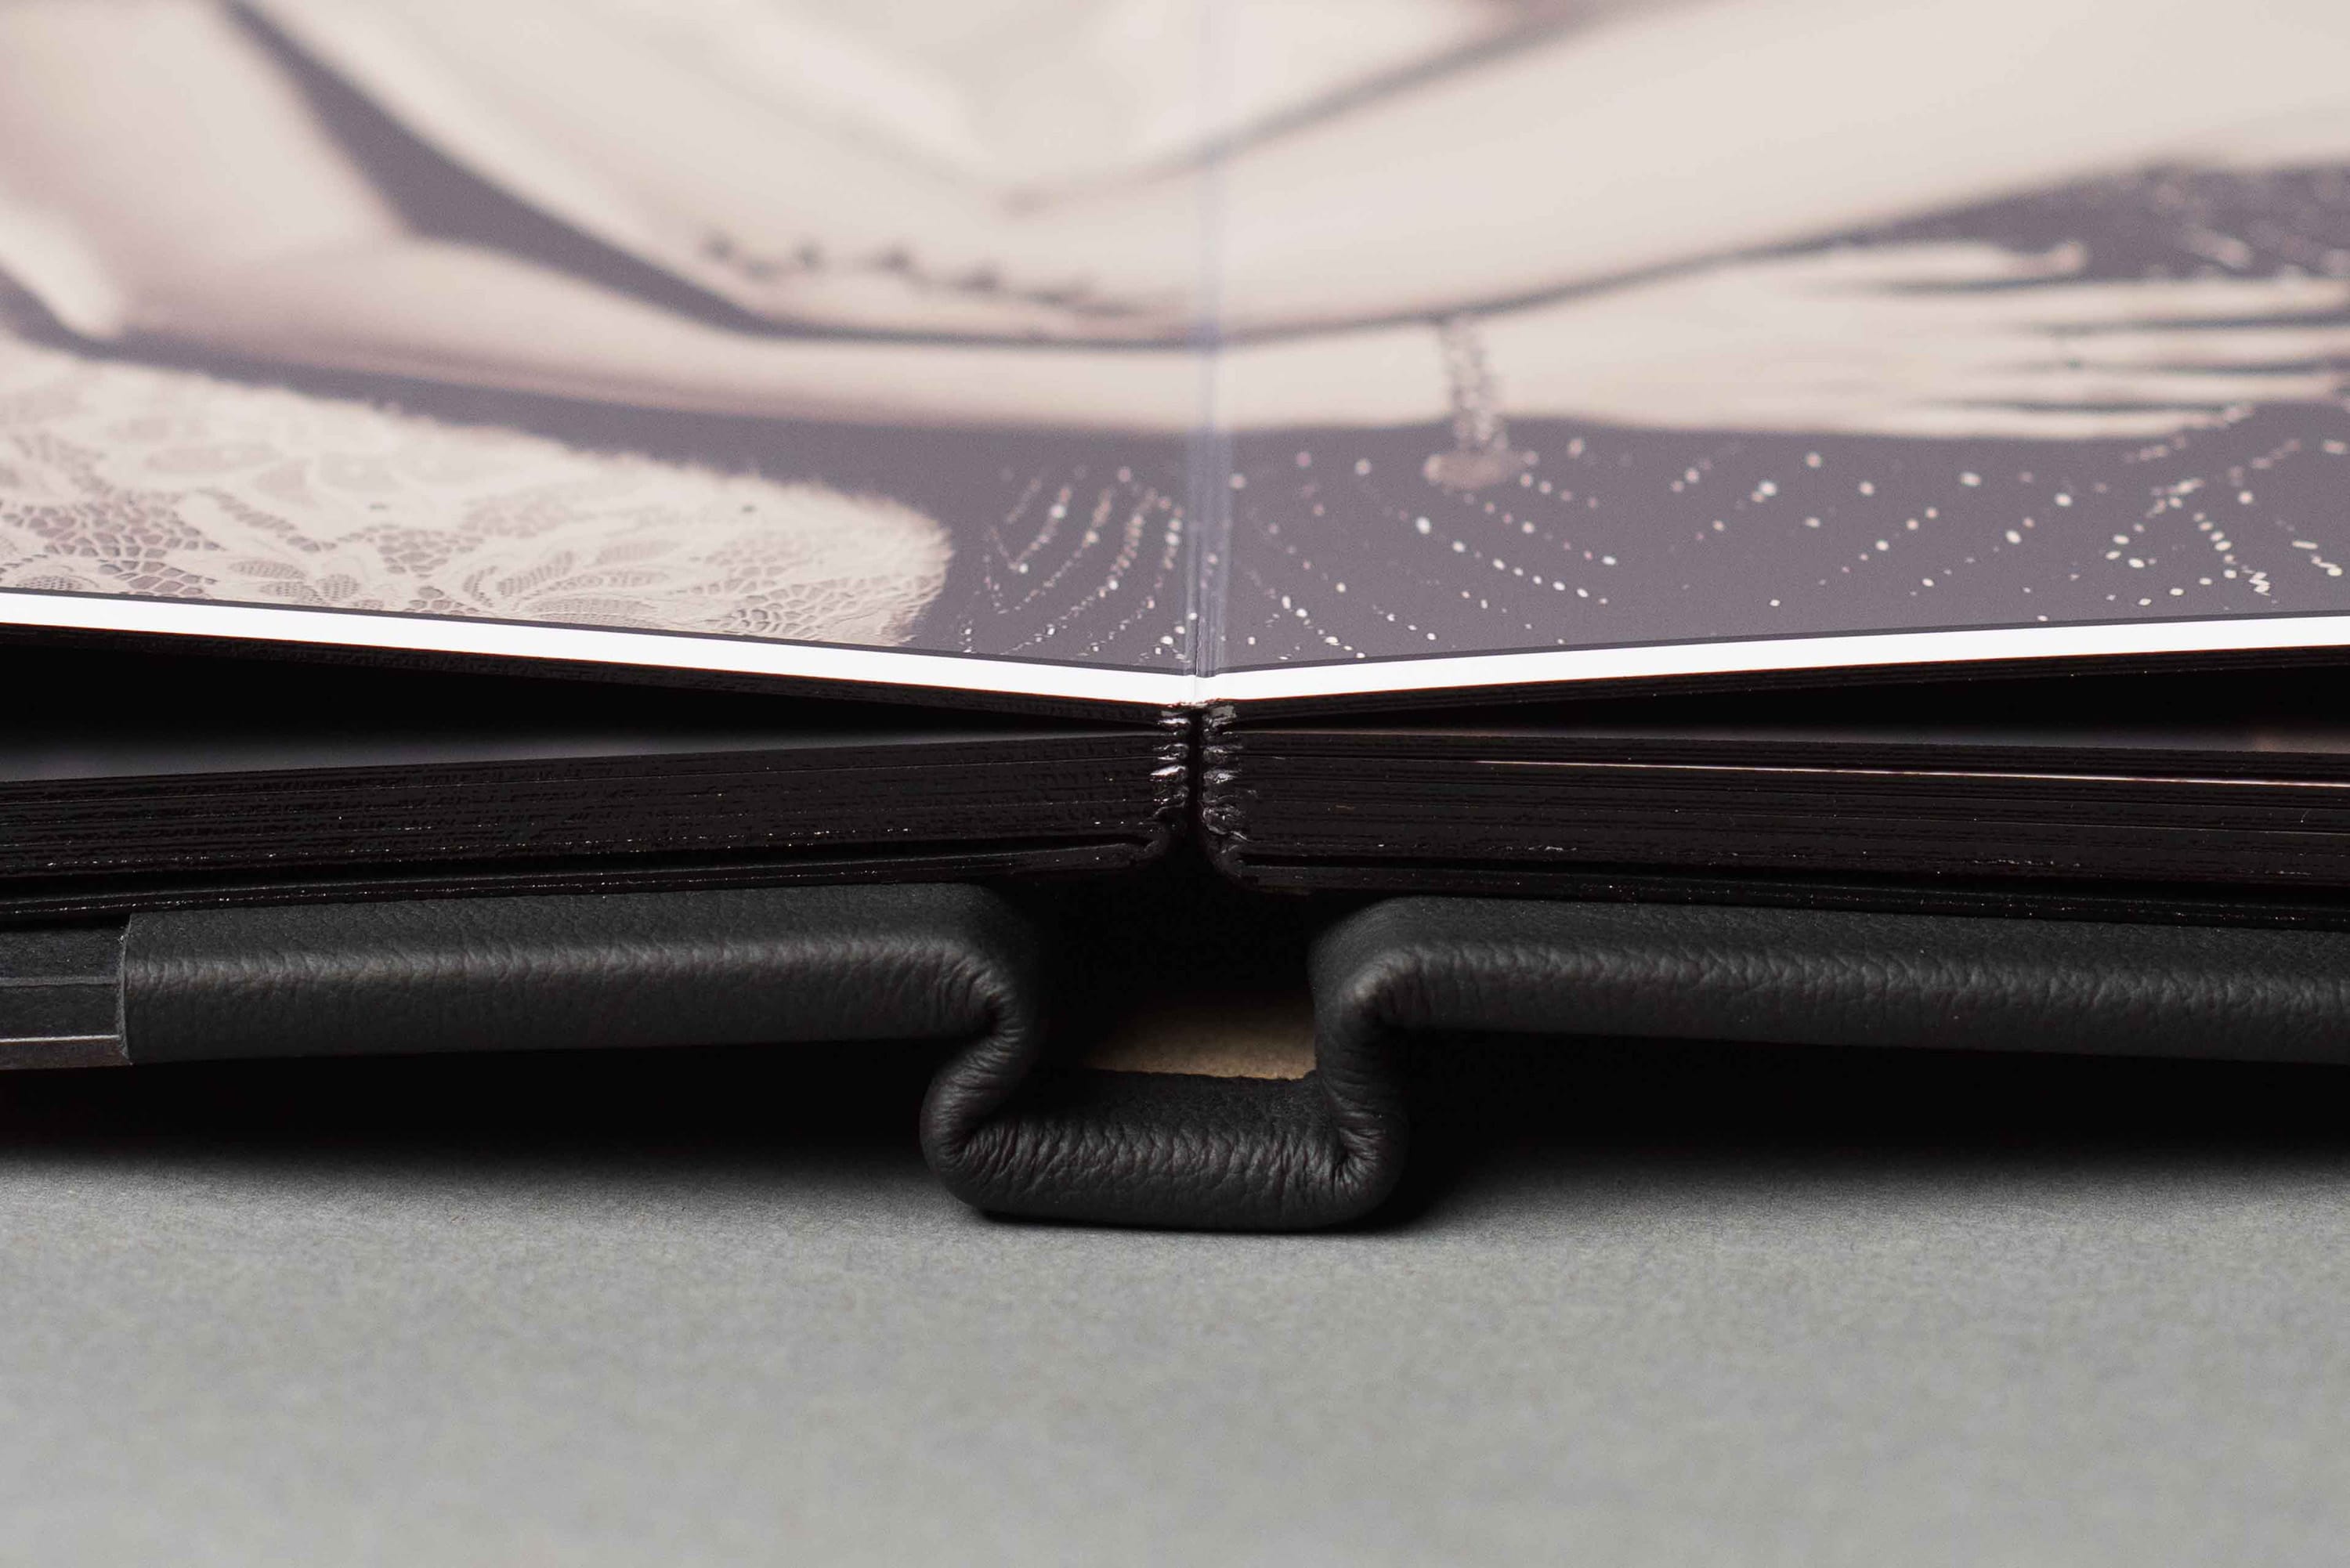 Detail shot of modern album pages and their thickness